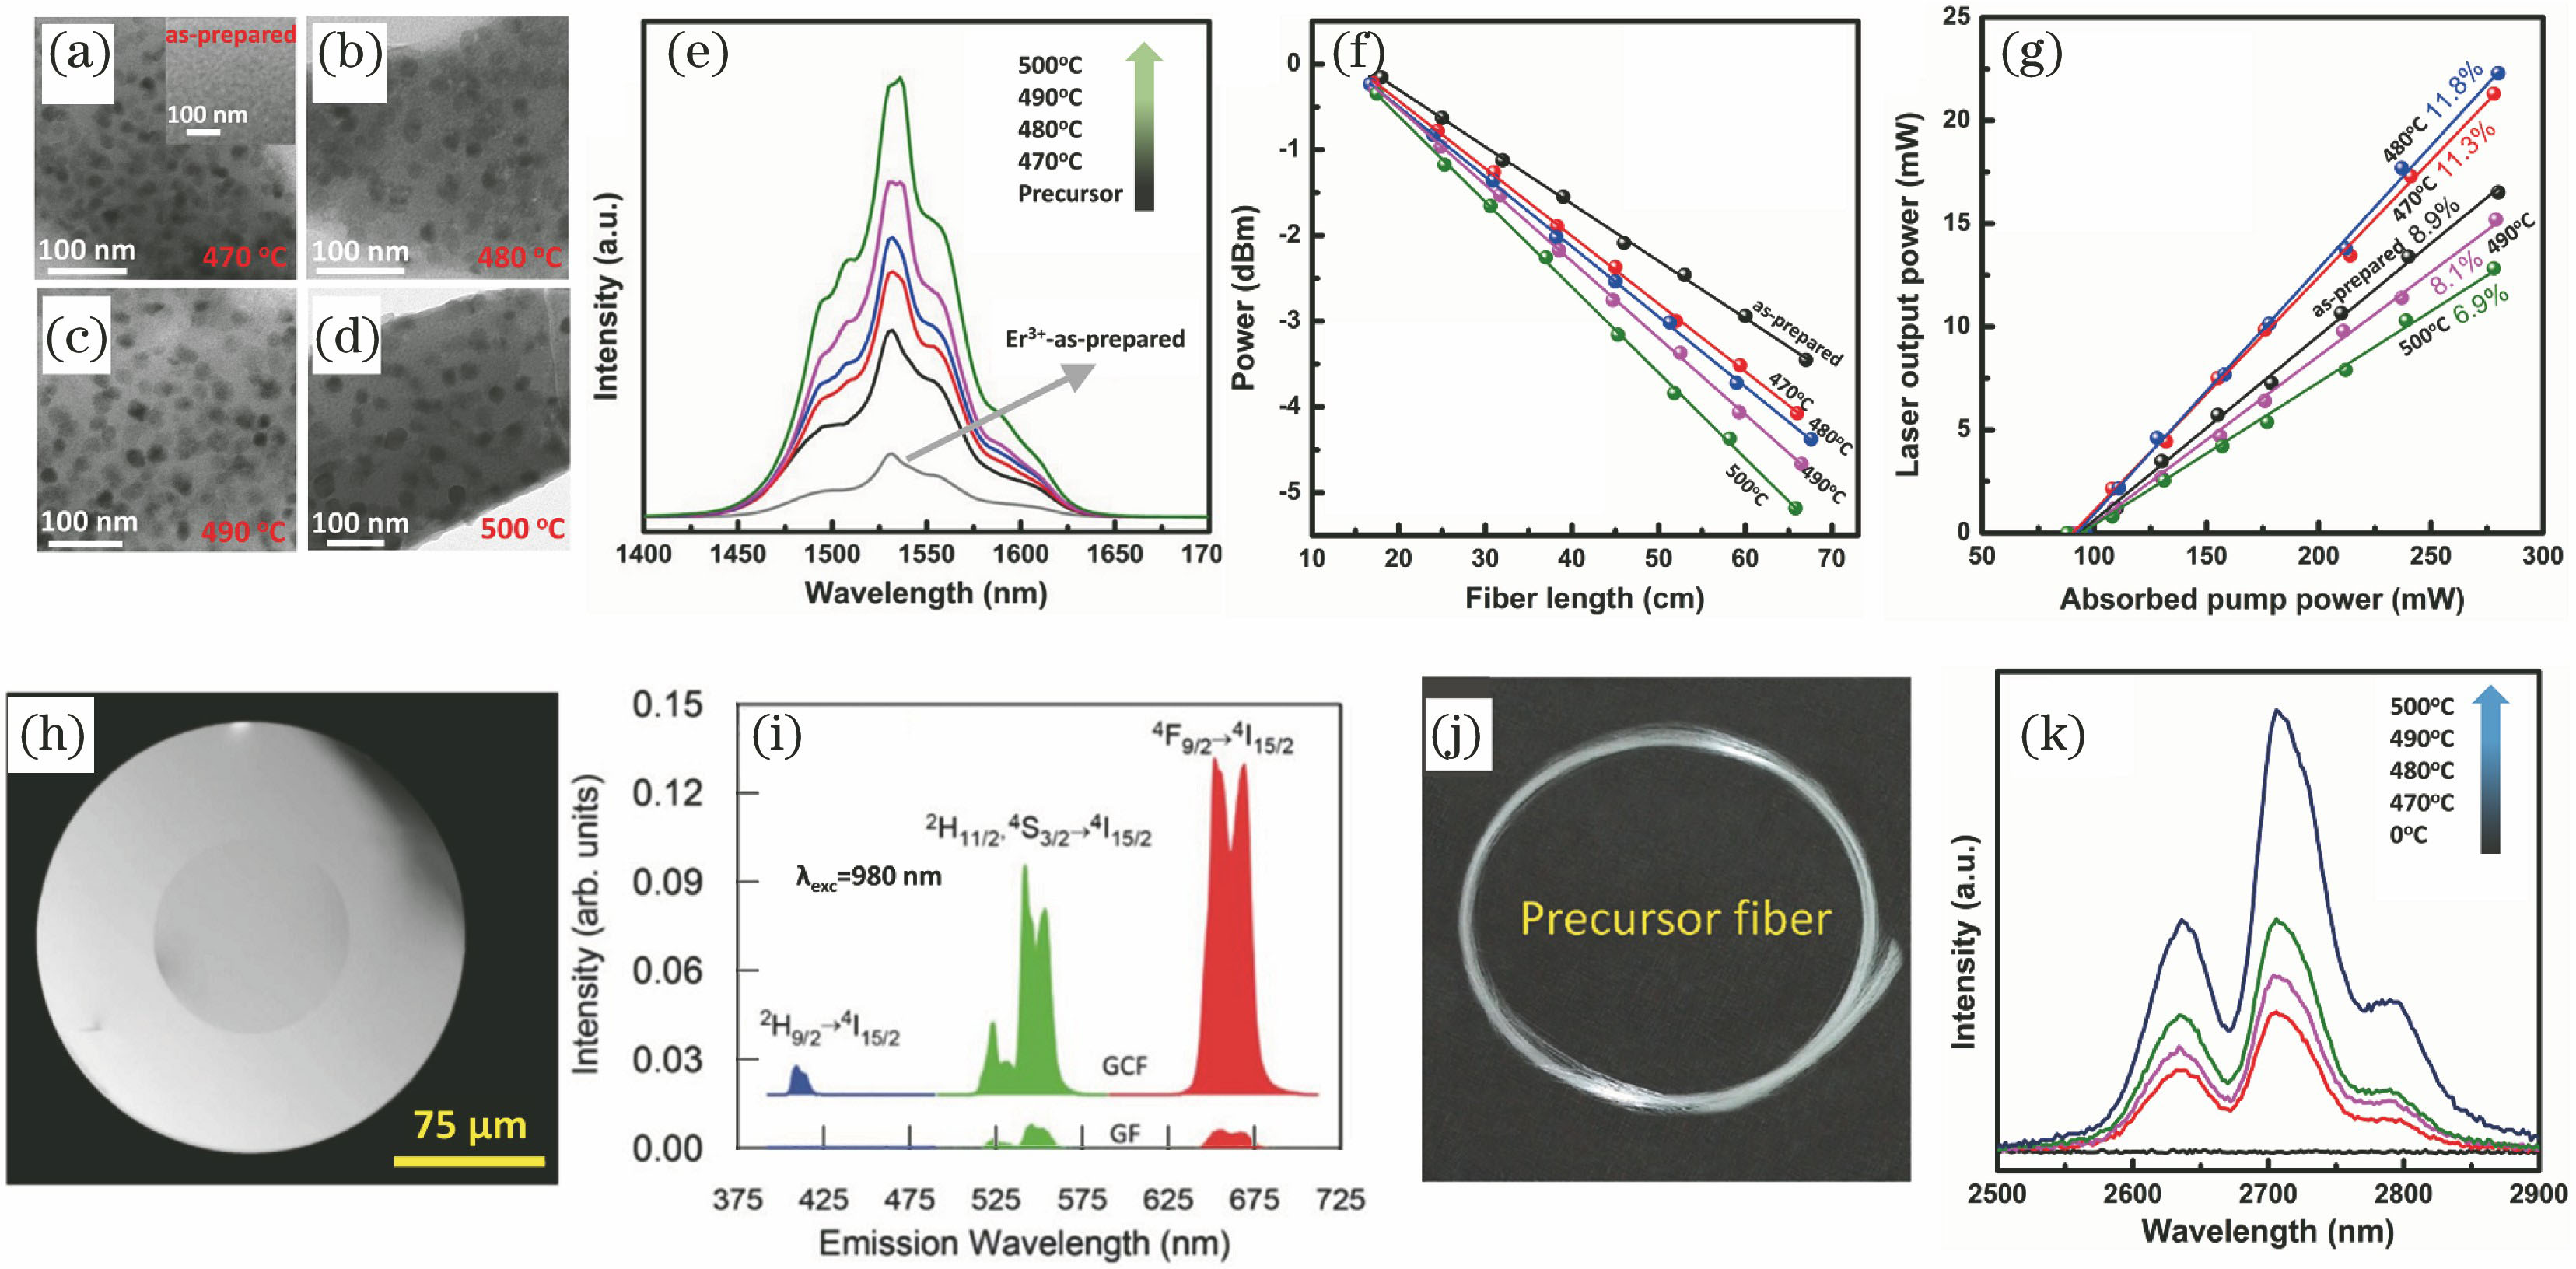 Optical performance of rare earth ion-doped oxyfluoride glass ceramic fibers[14,17-18]. (a)-(d) TEM images of the glass ceramic fibers heat-treated at different temperatures; (e) 1.53 μm near-infrared (NIR) emission spectra of Er3+ singly and Er3+/Yb3+ co-doped samples; (f) cutback measurement of the precursor glass fibers and glass cera